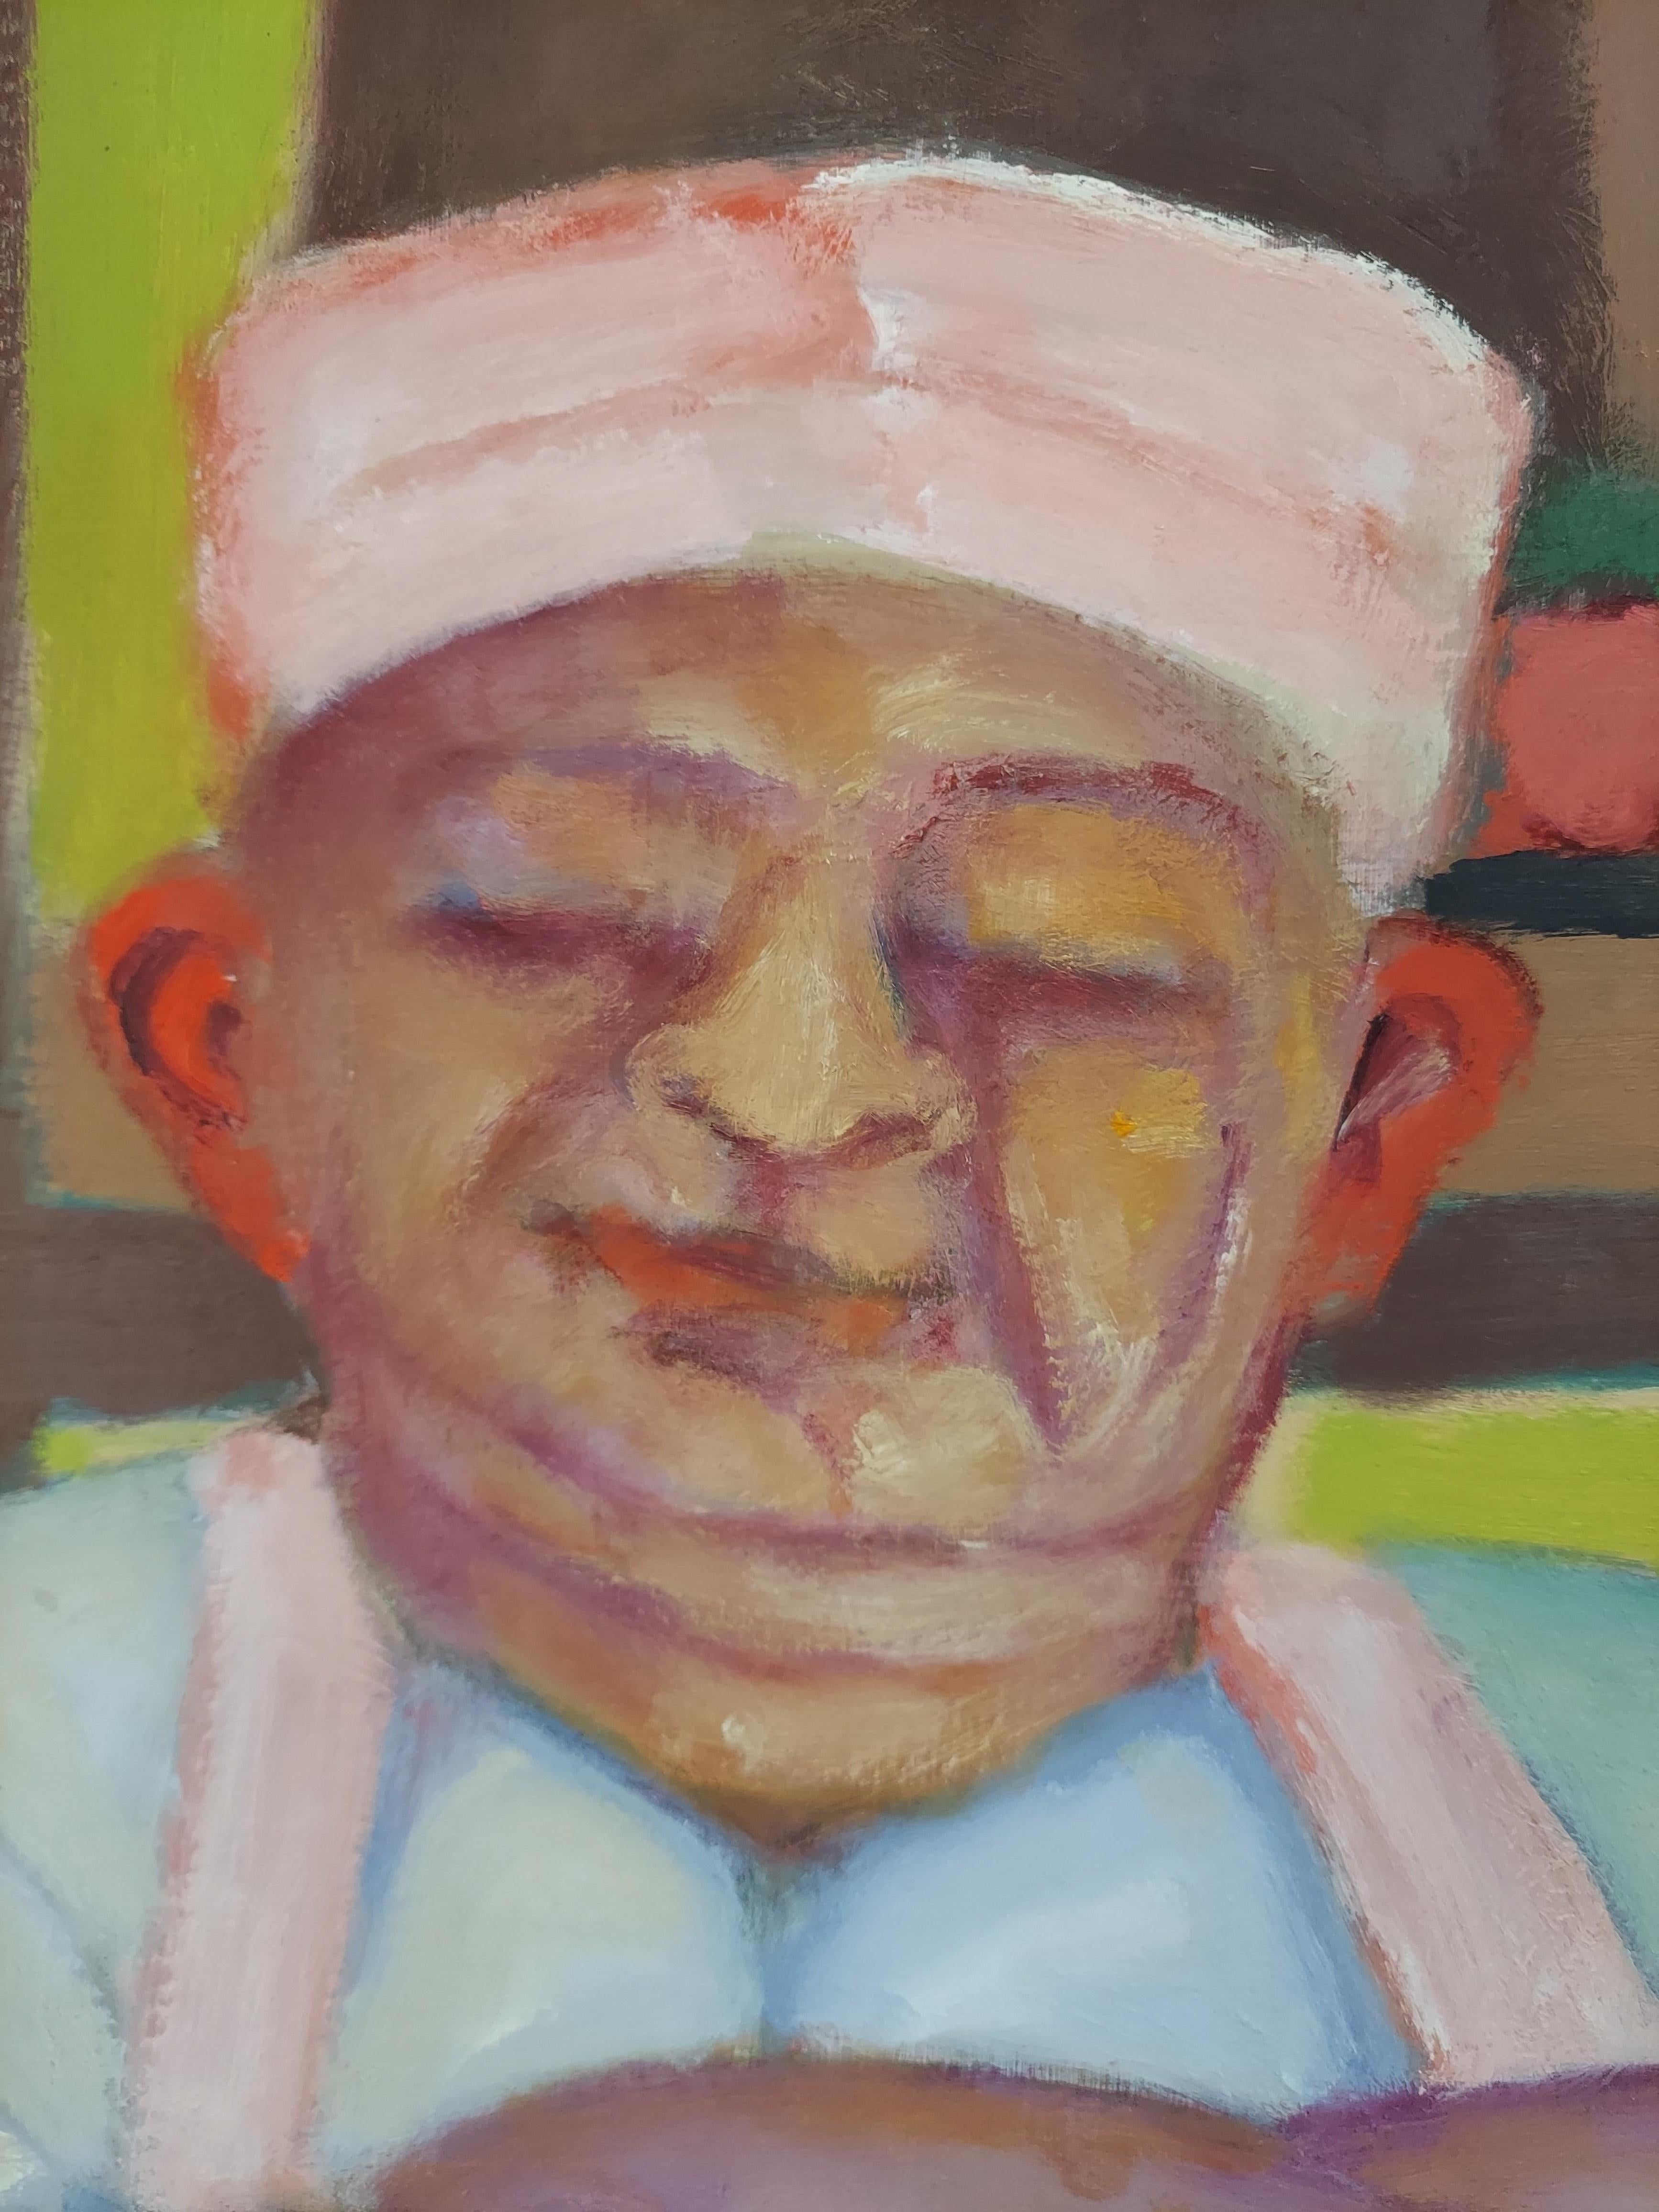 Pastry chef food cooking theme sweet color figure resembles delicious cakes  - Painting by Stephen Basso